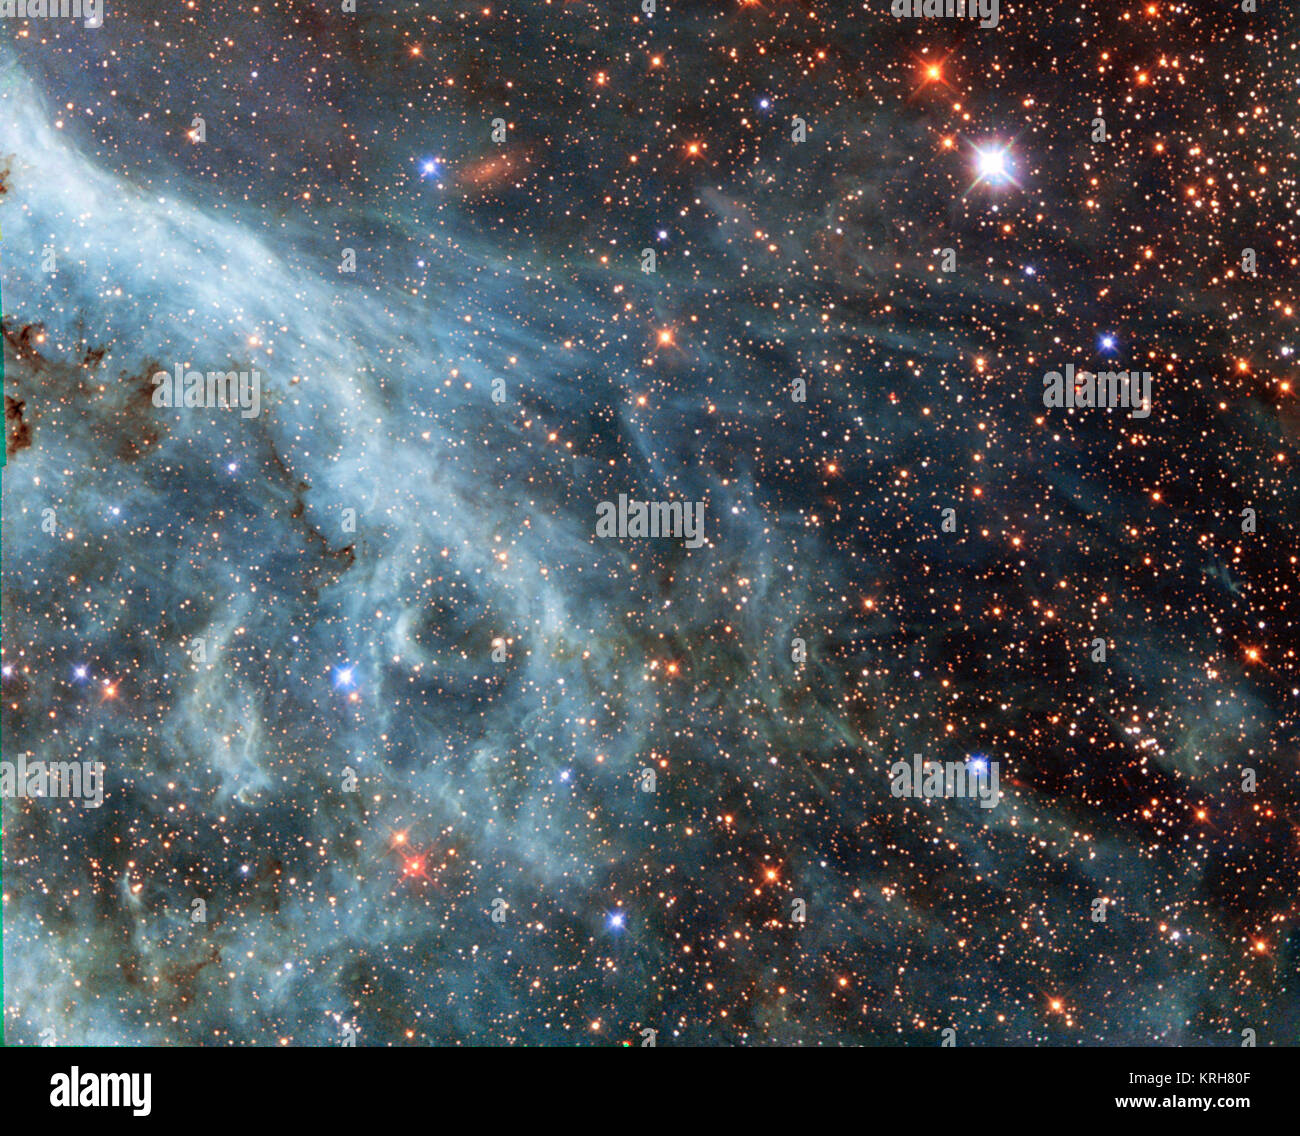 The brightly glowing plumes seen in this image are reminiscent of an underwater scene, with turquoise-tinted currents and nebulous strands reaching out into the surroundings. However, this is no ocean. This image actually shows part of the Large Magellanic Cloud (LMC), a small nearby galaxy that orbits our galaxy, the Milky Way, and appears as a blurred blob in our skies. The NASA/ESA Hubble Space Telescope has peeked many times into this galaxy, releasing stunning images of the whirling clouds of gas and sparkling stars (opo9944a, heic1301, potw1408a). This image shows part of the Tarantula N Stock Photo